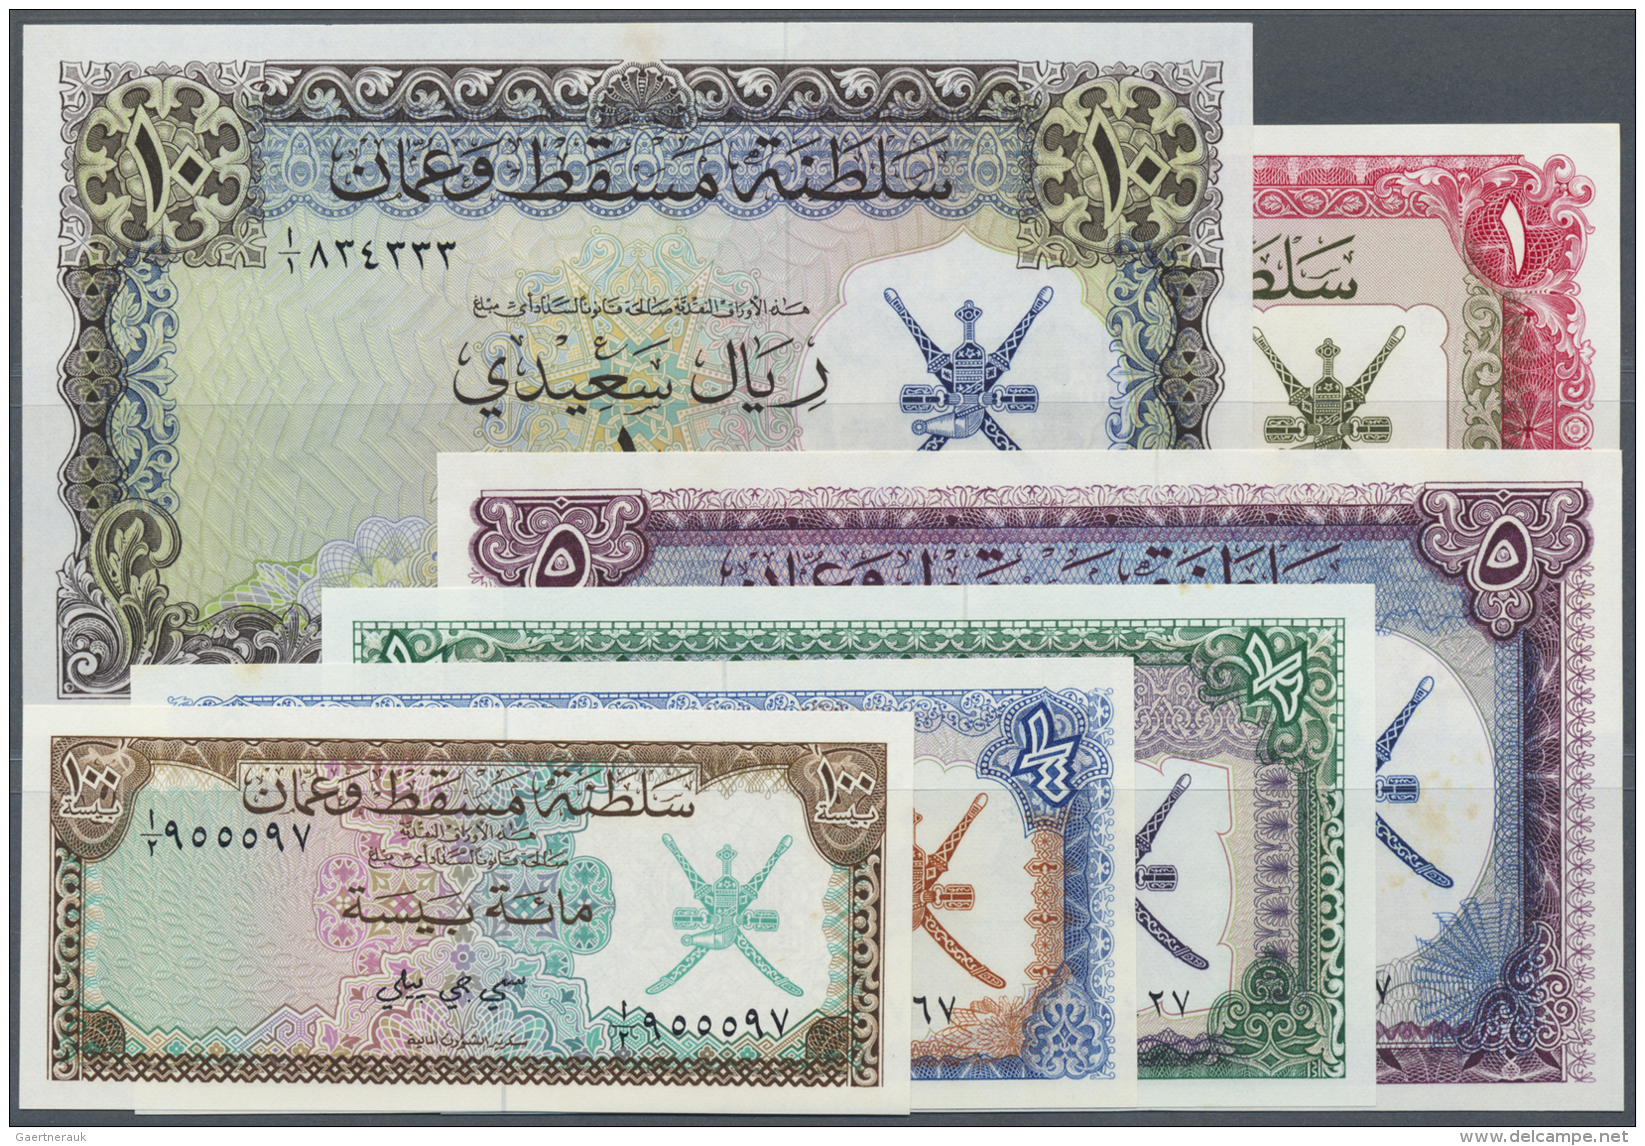 Oman: Muscat &amp; Oman Complete Set From 100 Baisa To 10 Rials ND P. 1-6, The 1/4, 5, 10 And 1 Rials In AUNC, The 5 And - Oman